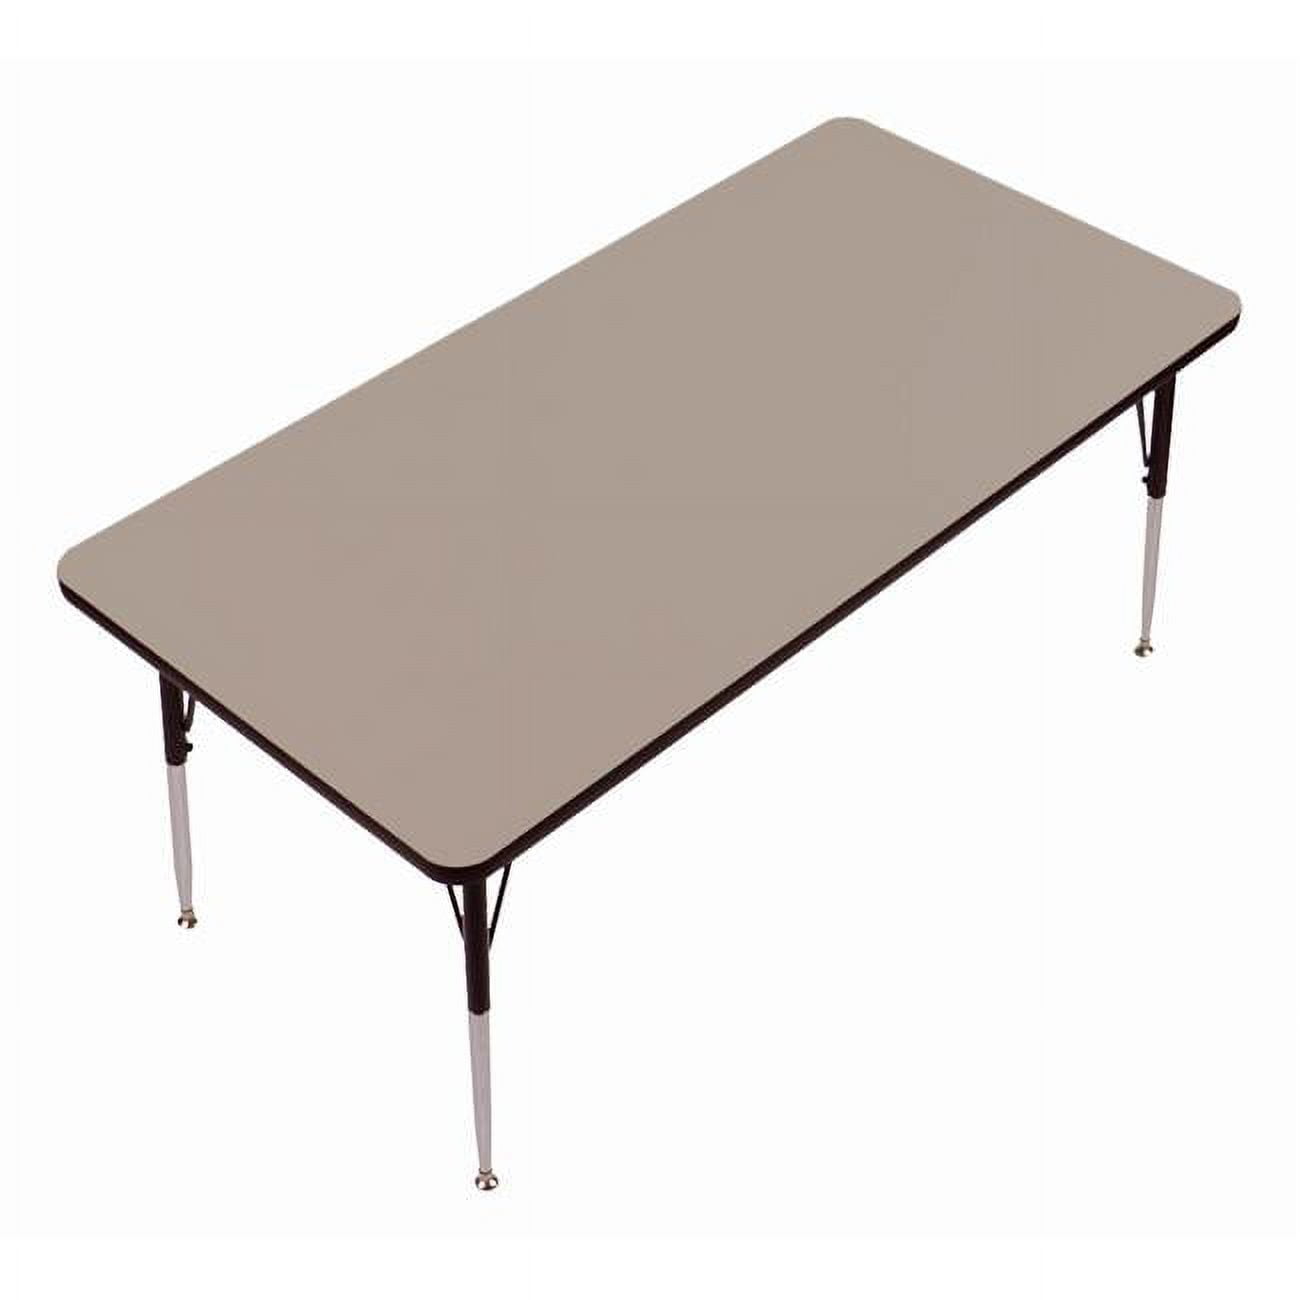 Picture of Correll A2448-TRPS-54 1.25 in. High Pressure Top Trapezoid Activity Tables, Savannah Sand - 24 x 48 in.